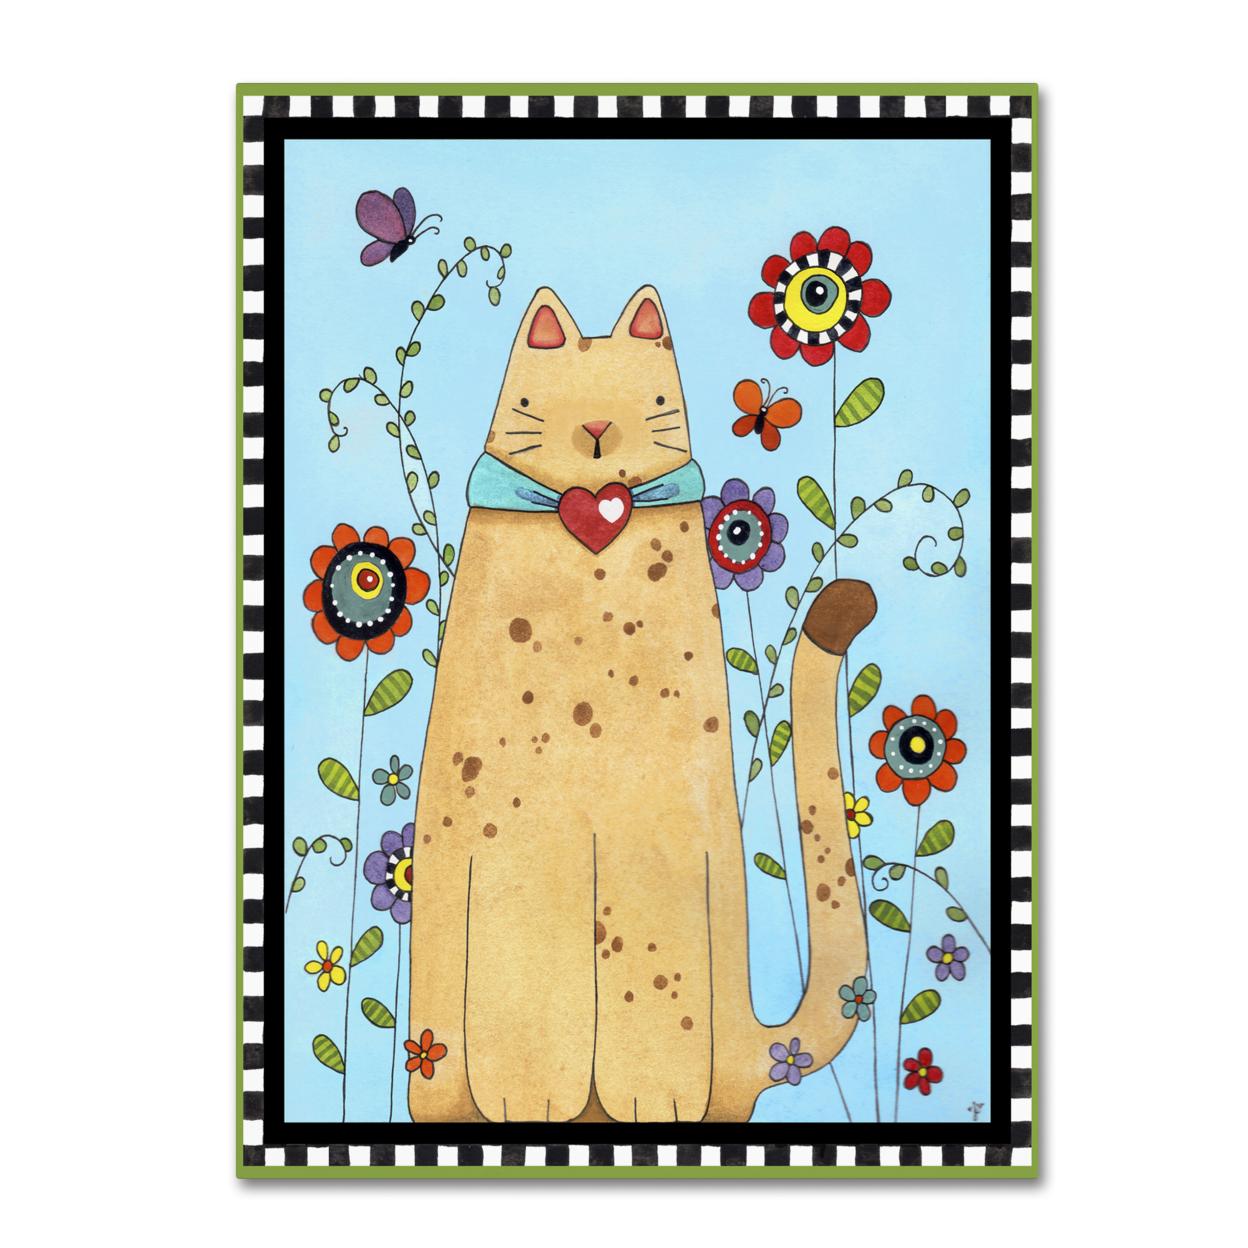 Jennifer Nilsson 'Kitty In The Garden' Canvas Wall Art 35 X 47 Inches